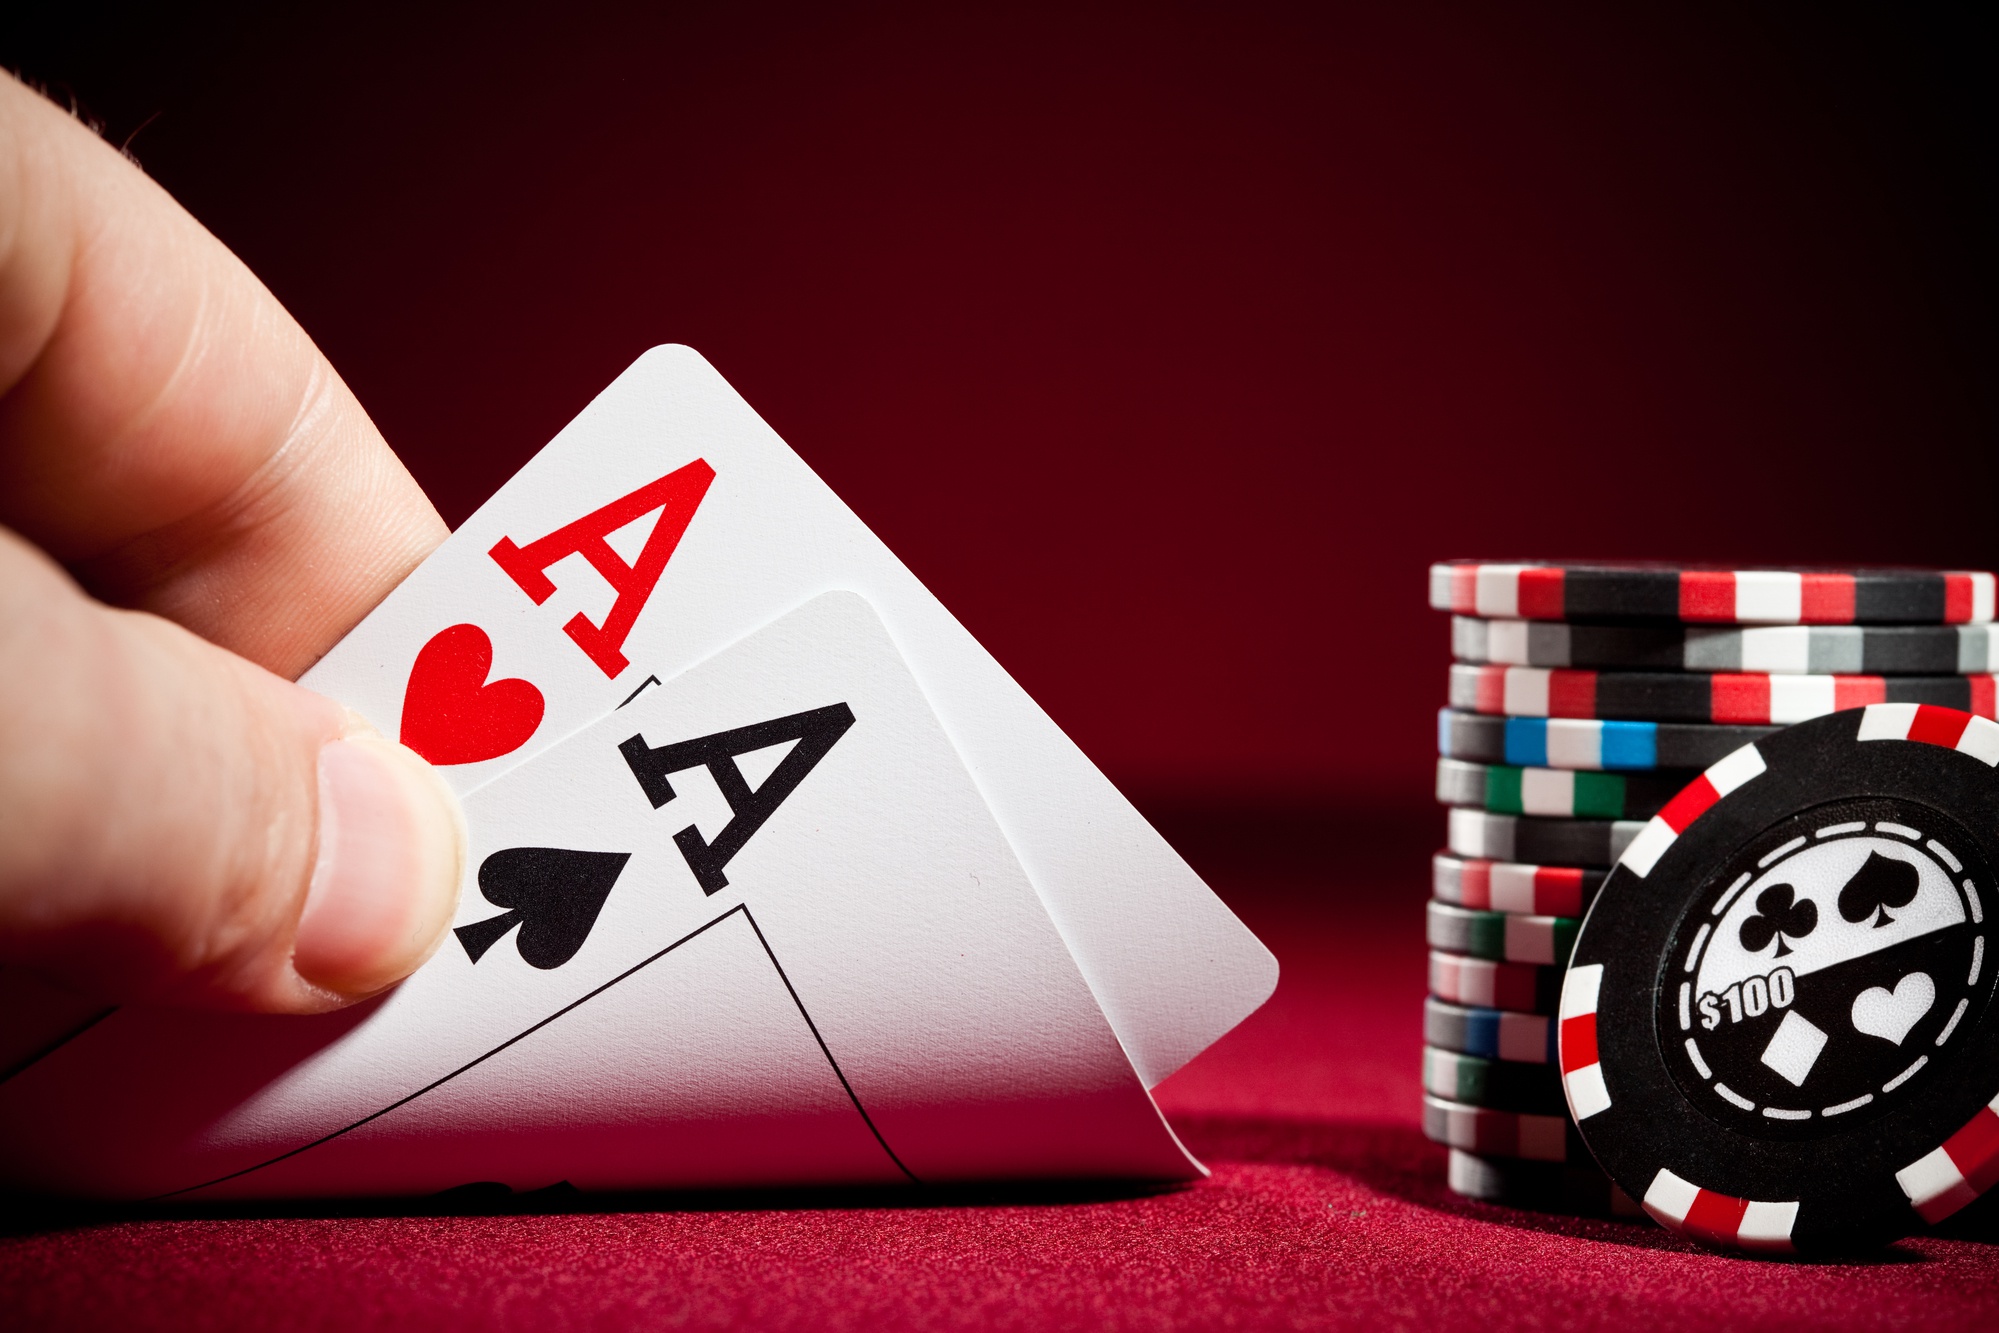 Don't Just Sit There! Start Getting More Online Casino